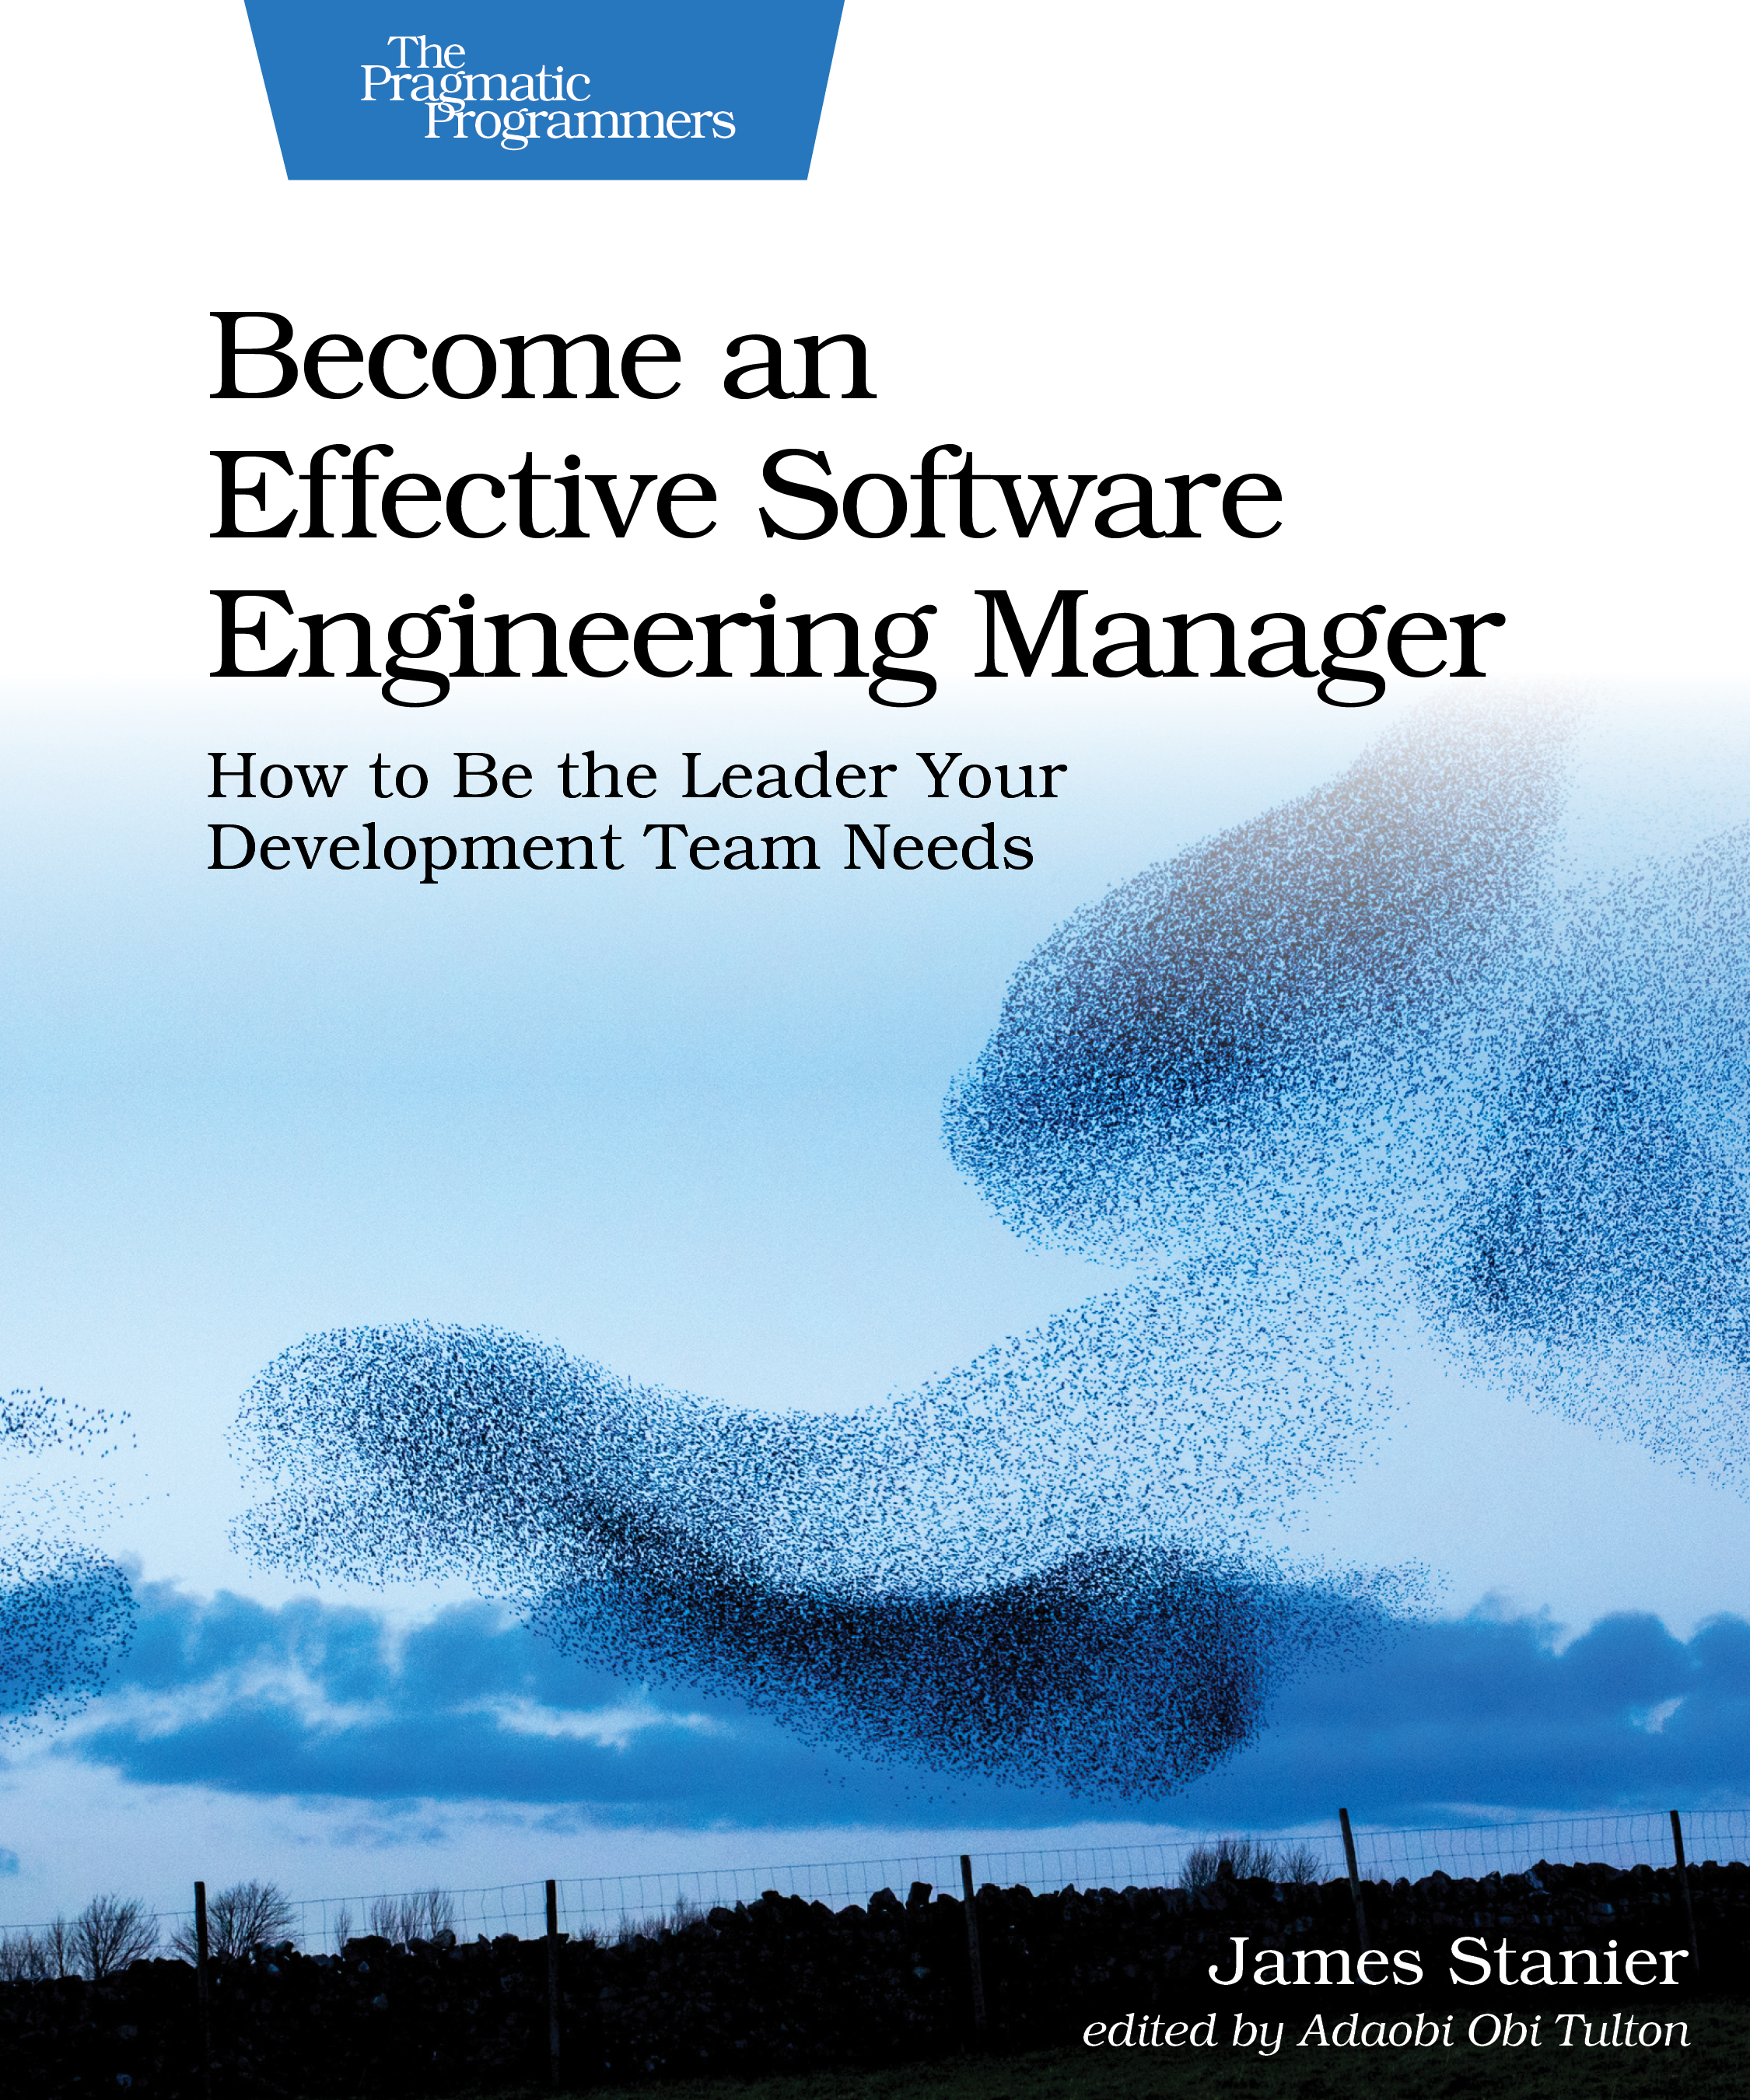 James Stanier: Become an Effective Software Engineering Manager (2020, Pragmatic Programmers, LLC, The)